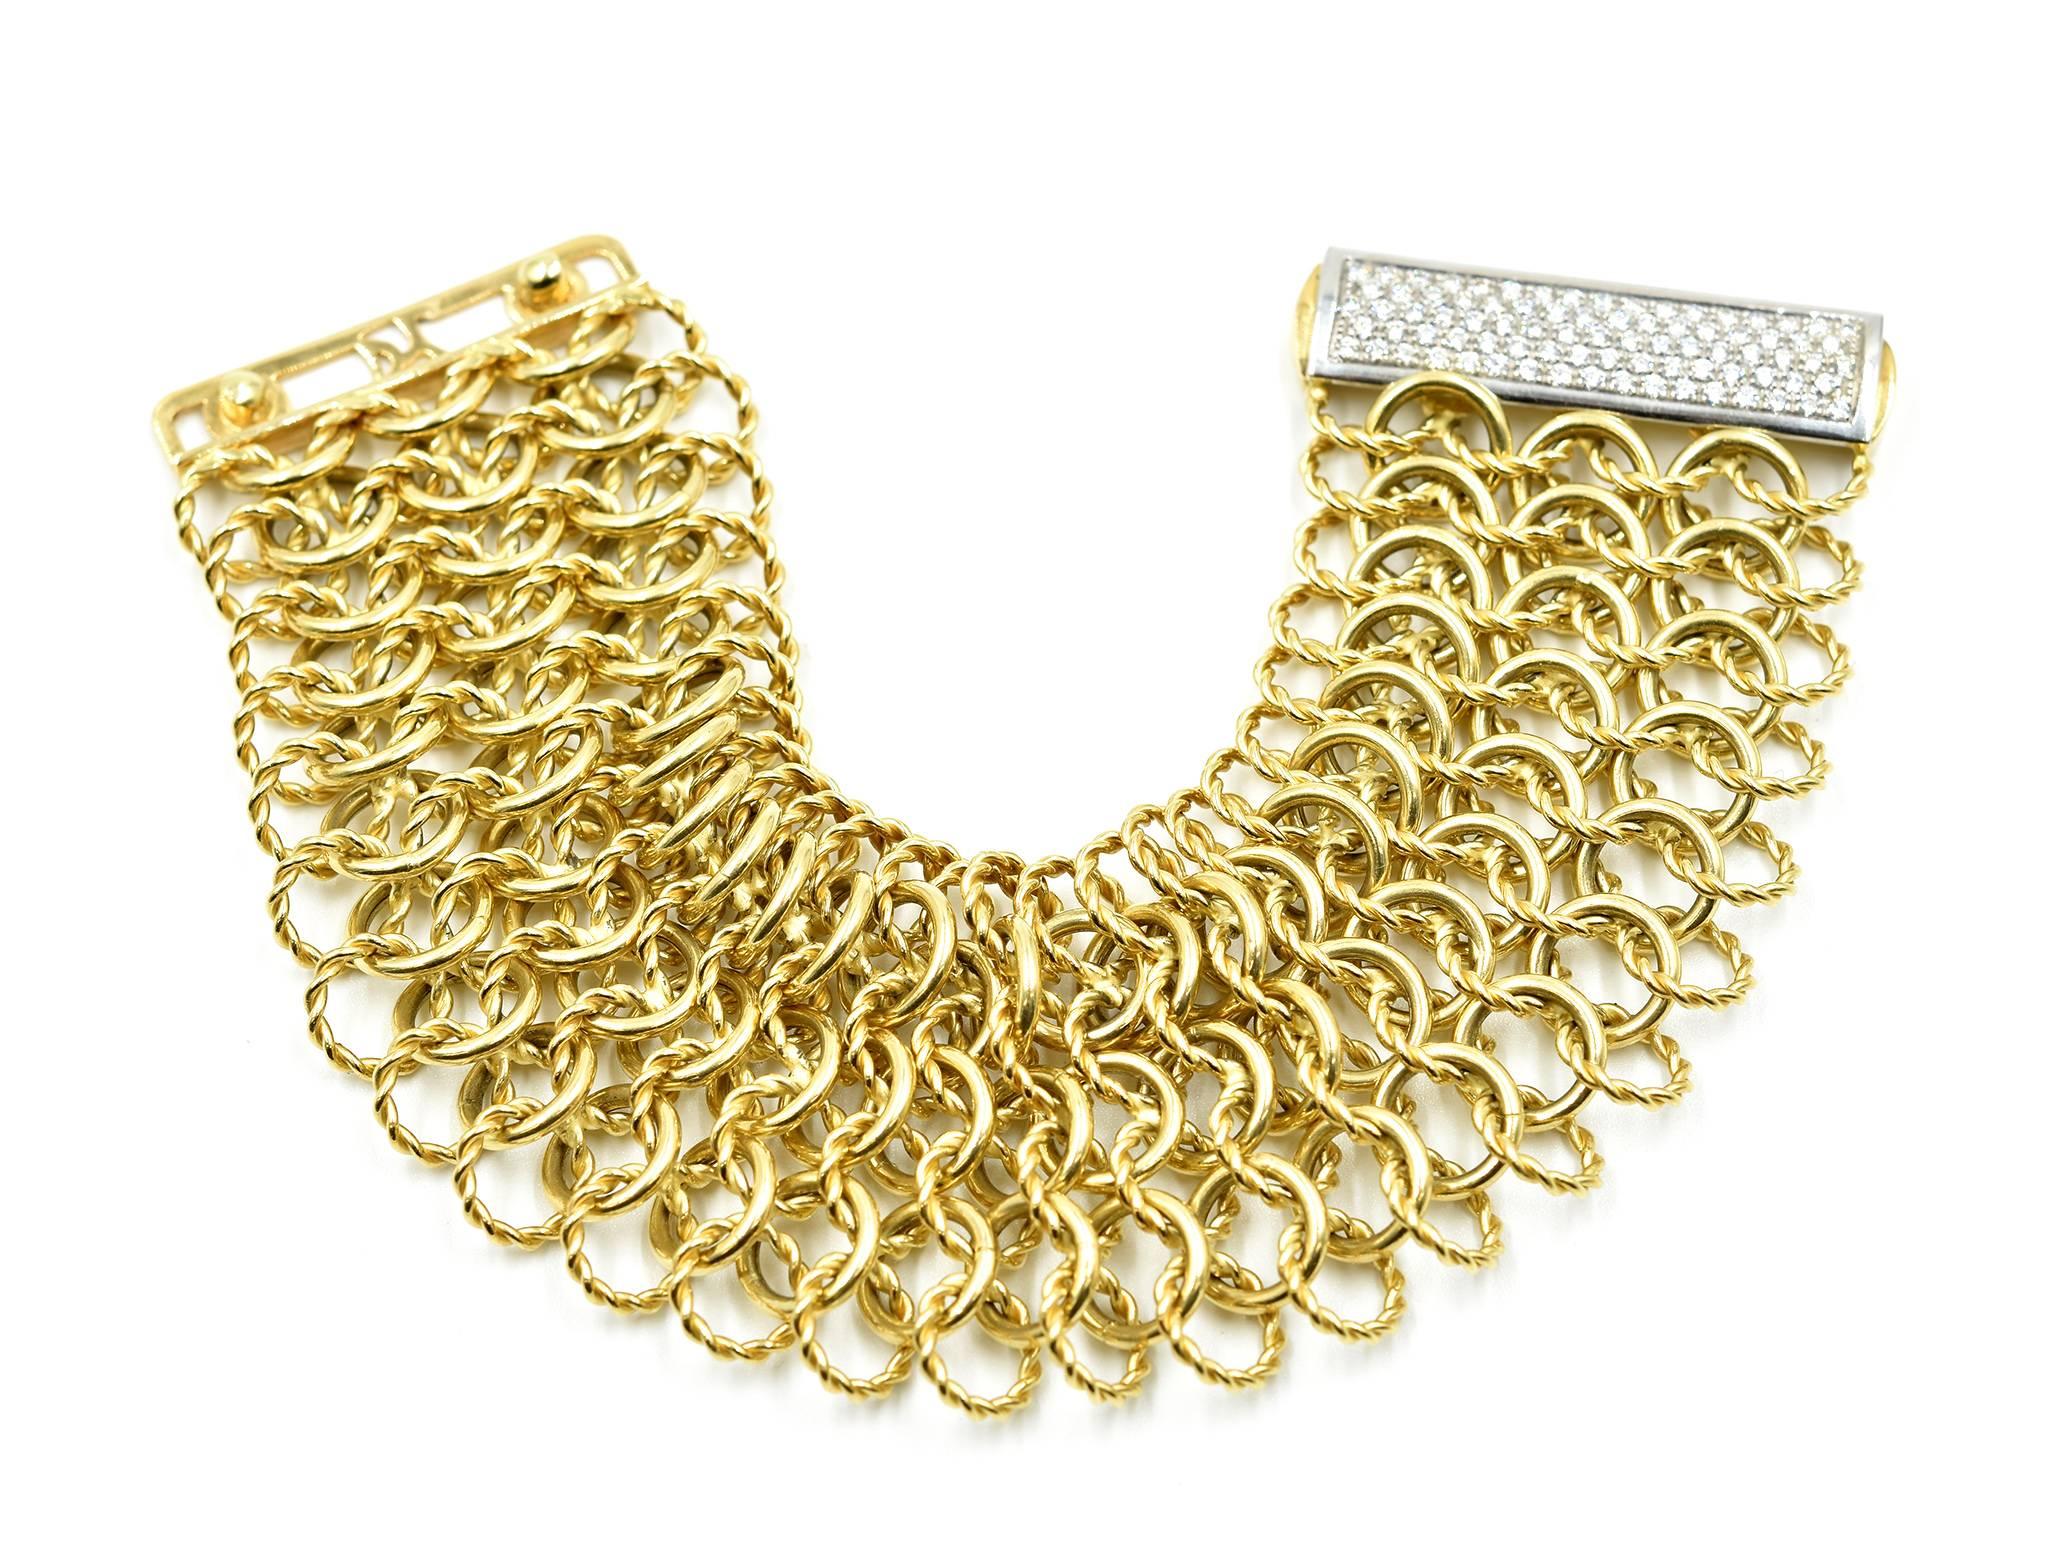 Designer: David Yurman
Collection: Quatrefoil
Material: 18k yellow gold
Diamonds: round brilliant 1.00 carat total weight
Color: G-H
Clarity: VS
Dimensions: 7 ¼ inches long x 1.75 inches wide
Weight: 75.90 grams
